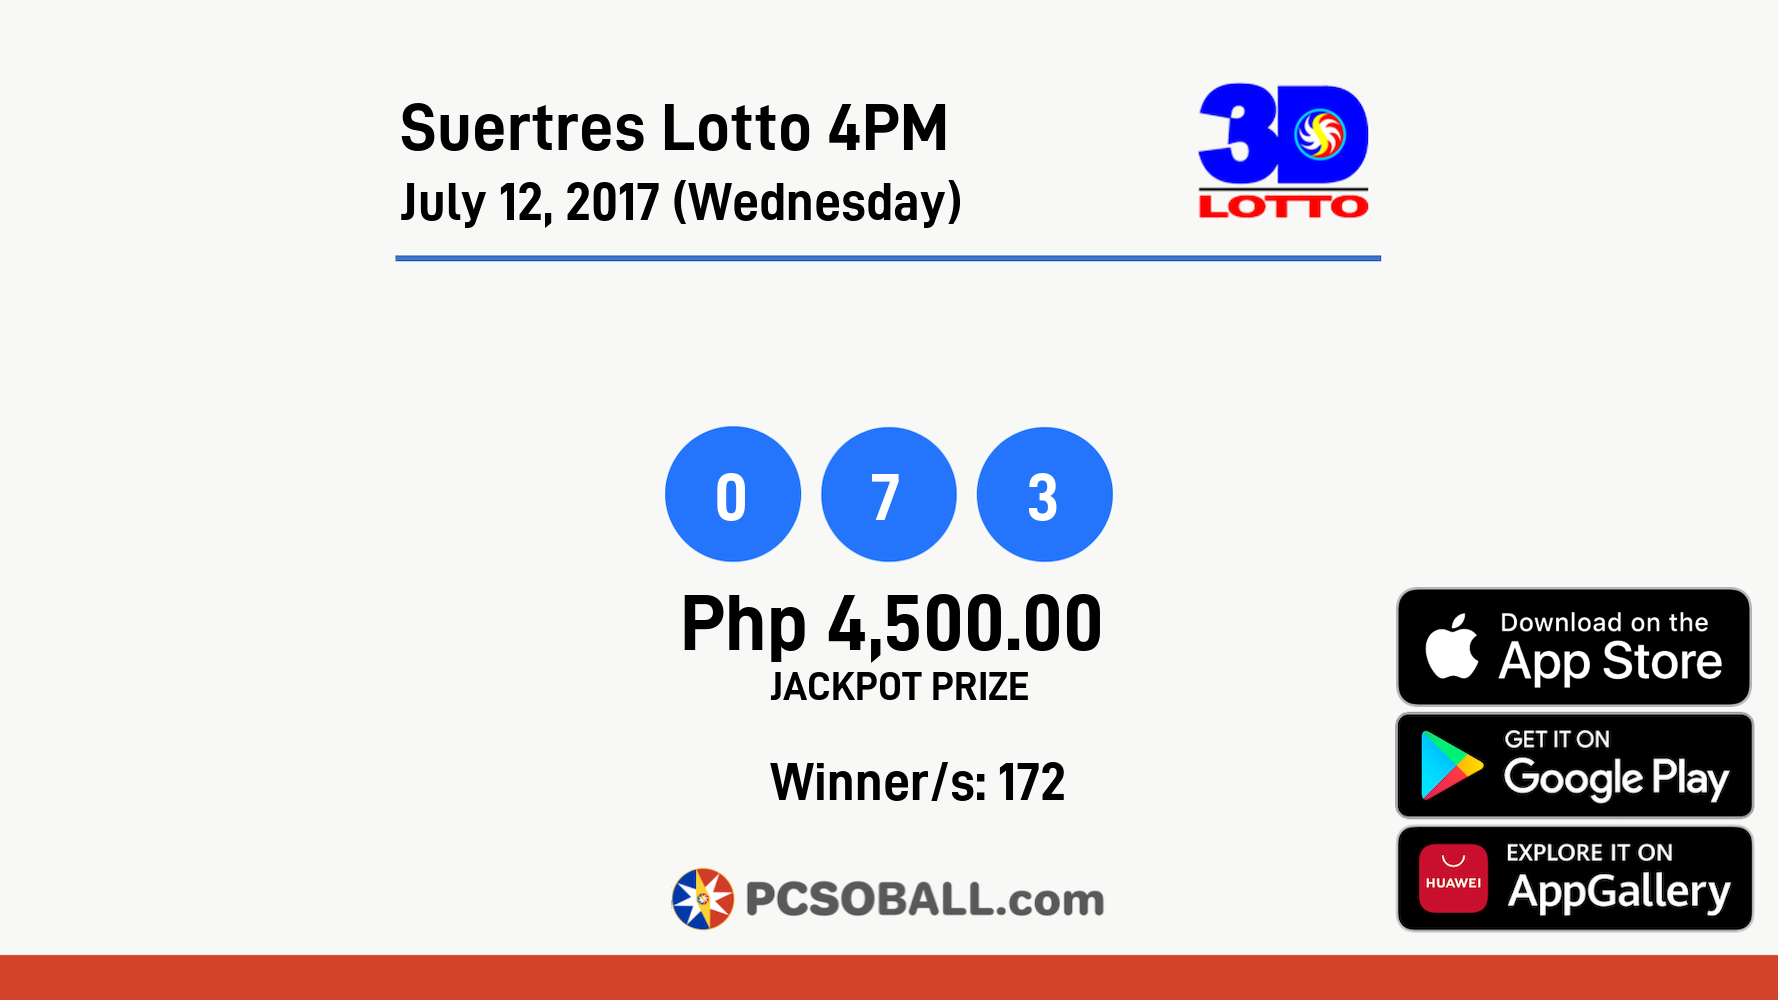 Suertres Lotto 4PM July 12, 2017 (Wednesday) Result